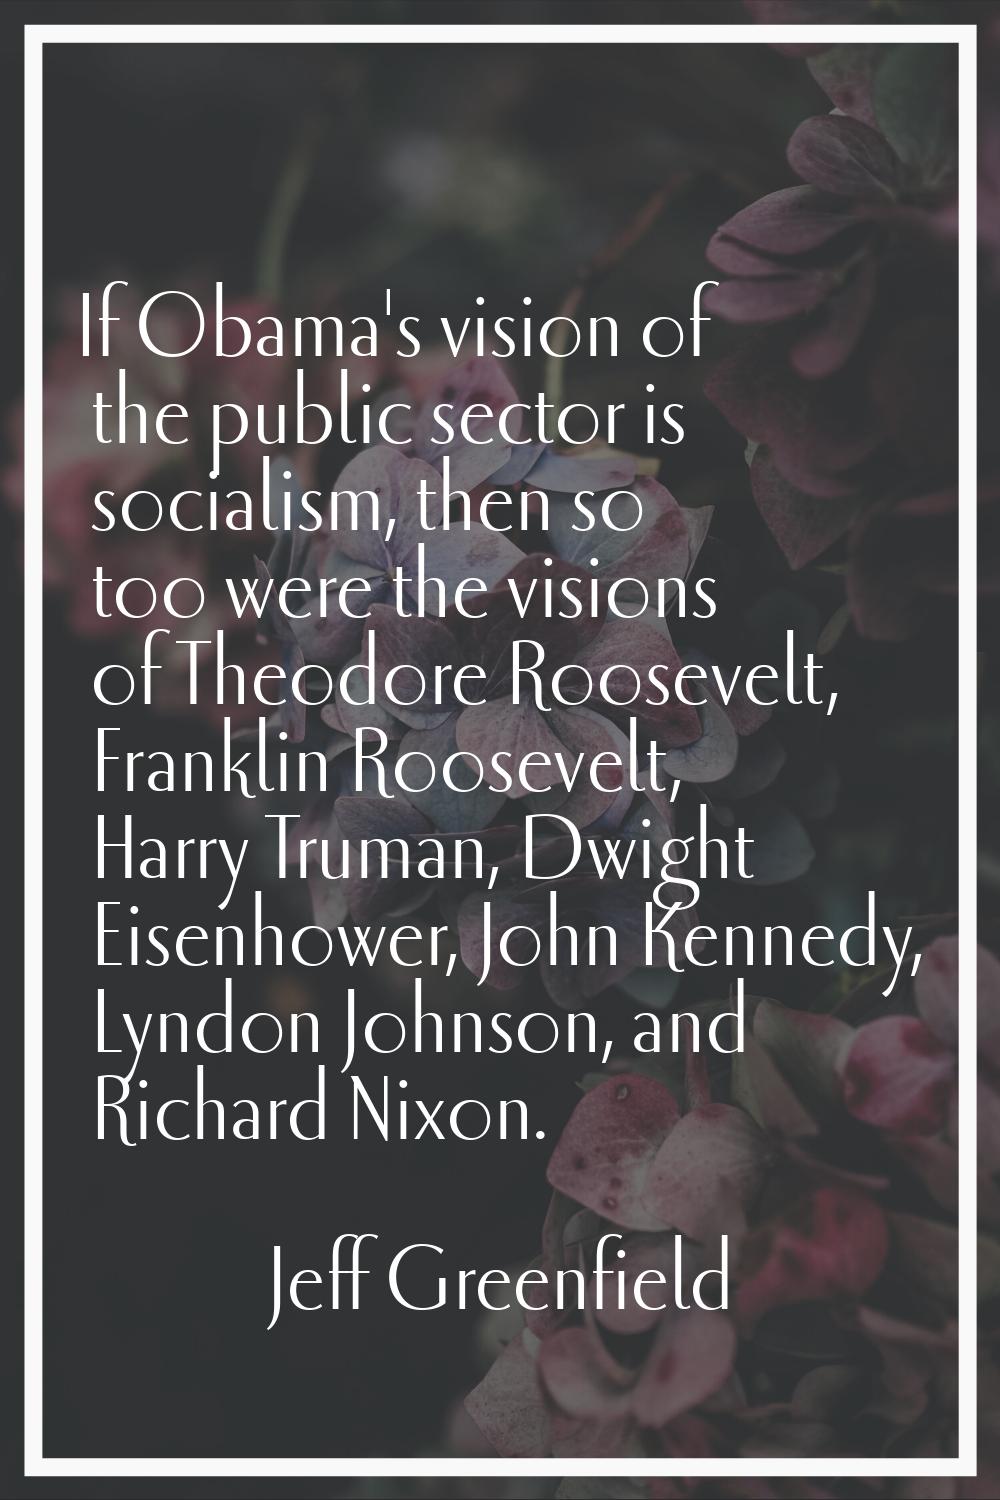 If Obama's vision of the public sector is socialism, then so too were the visions of Theodore Roose